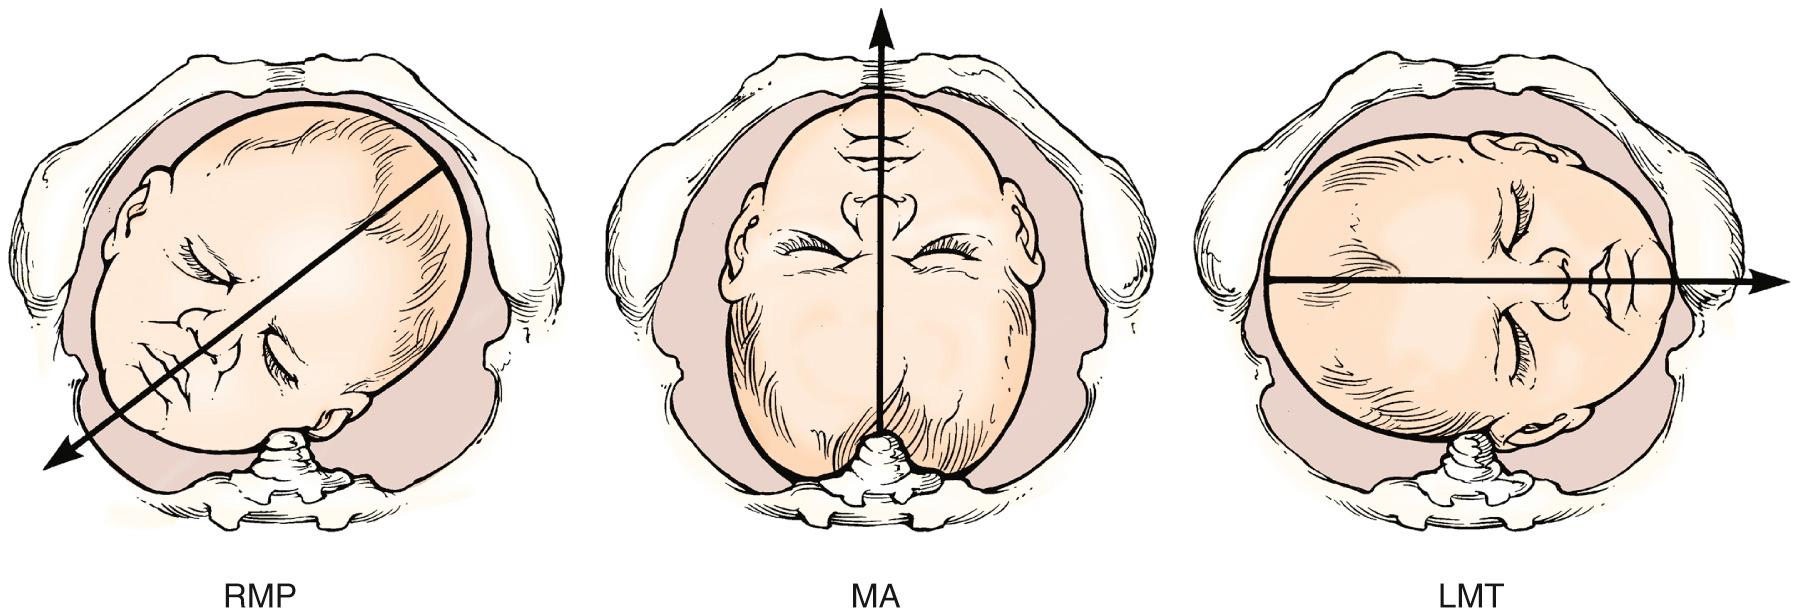 Fig. 17.7, The Point of Designation From Digital Examination in the Case of a Face Presentation is the Fetal Chin Relative to the Maternal Pelvis.